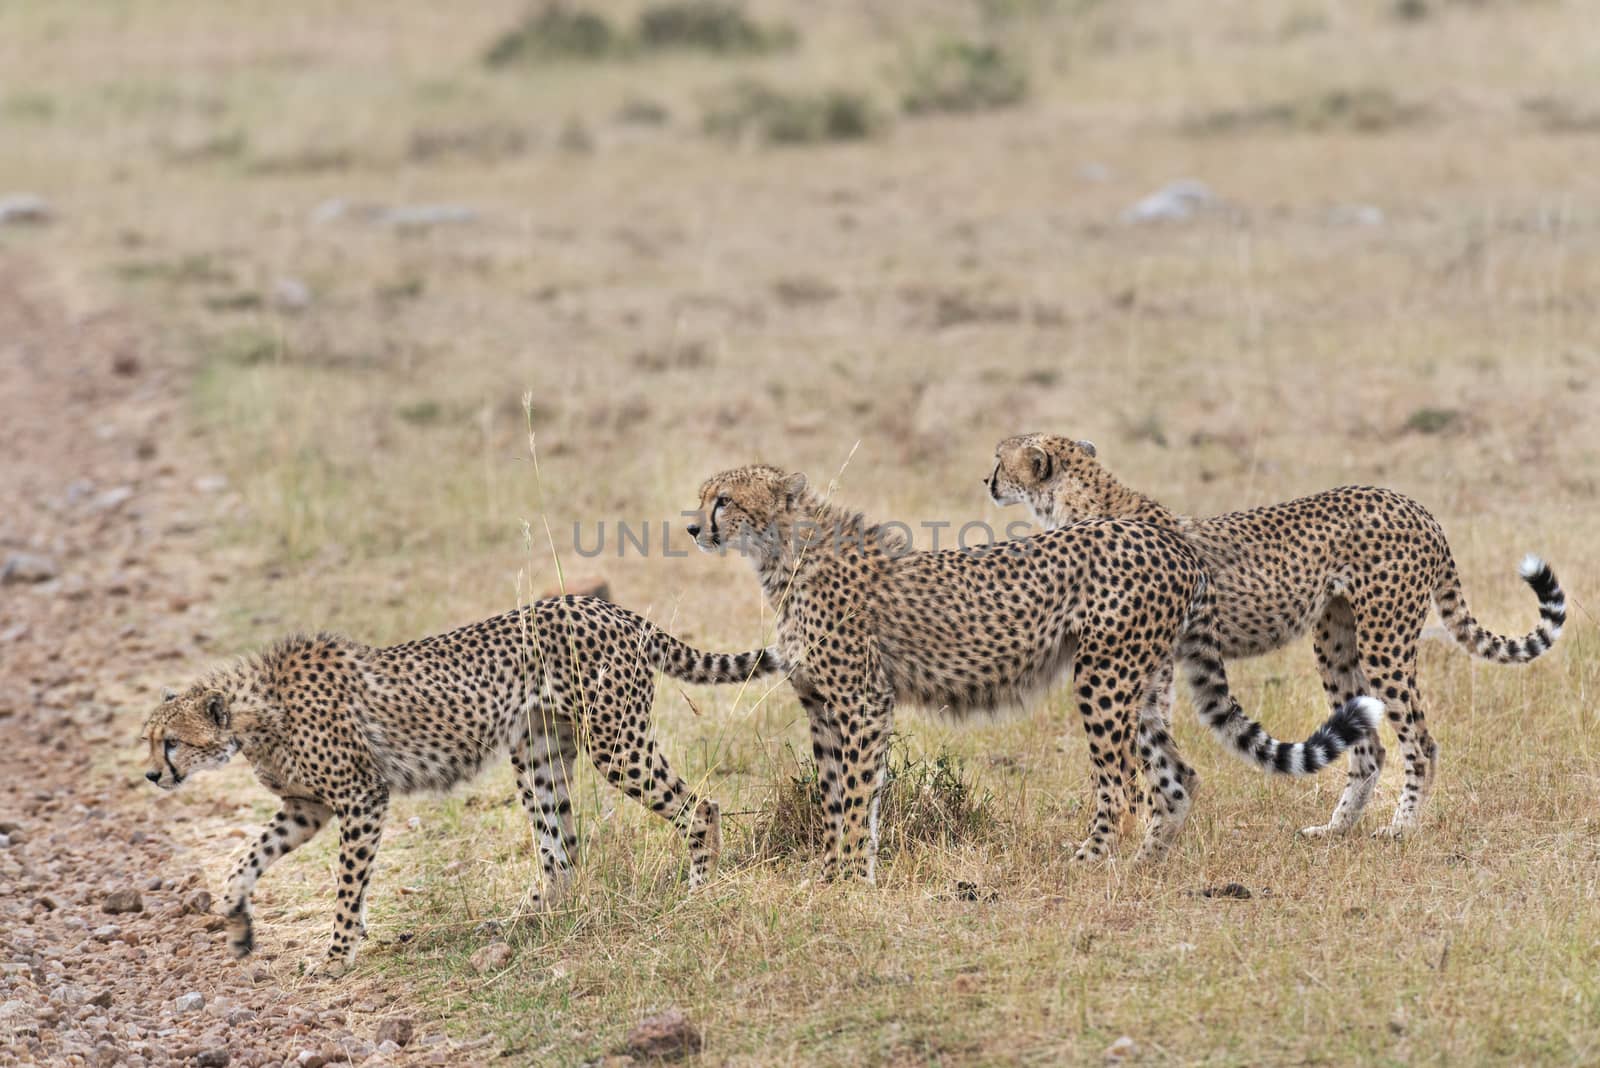 group of cheetahs crossing country road by snafu